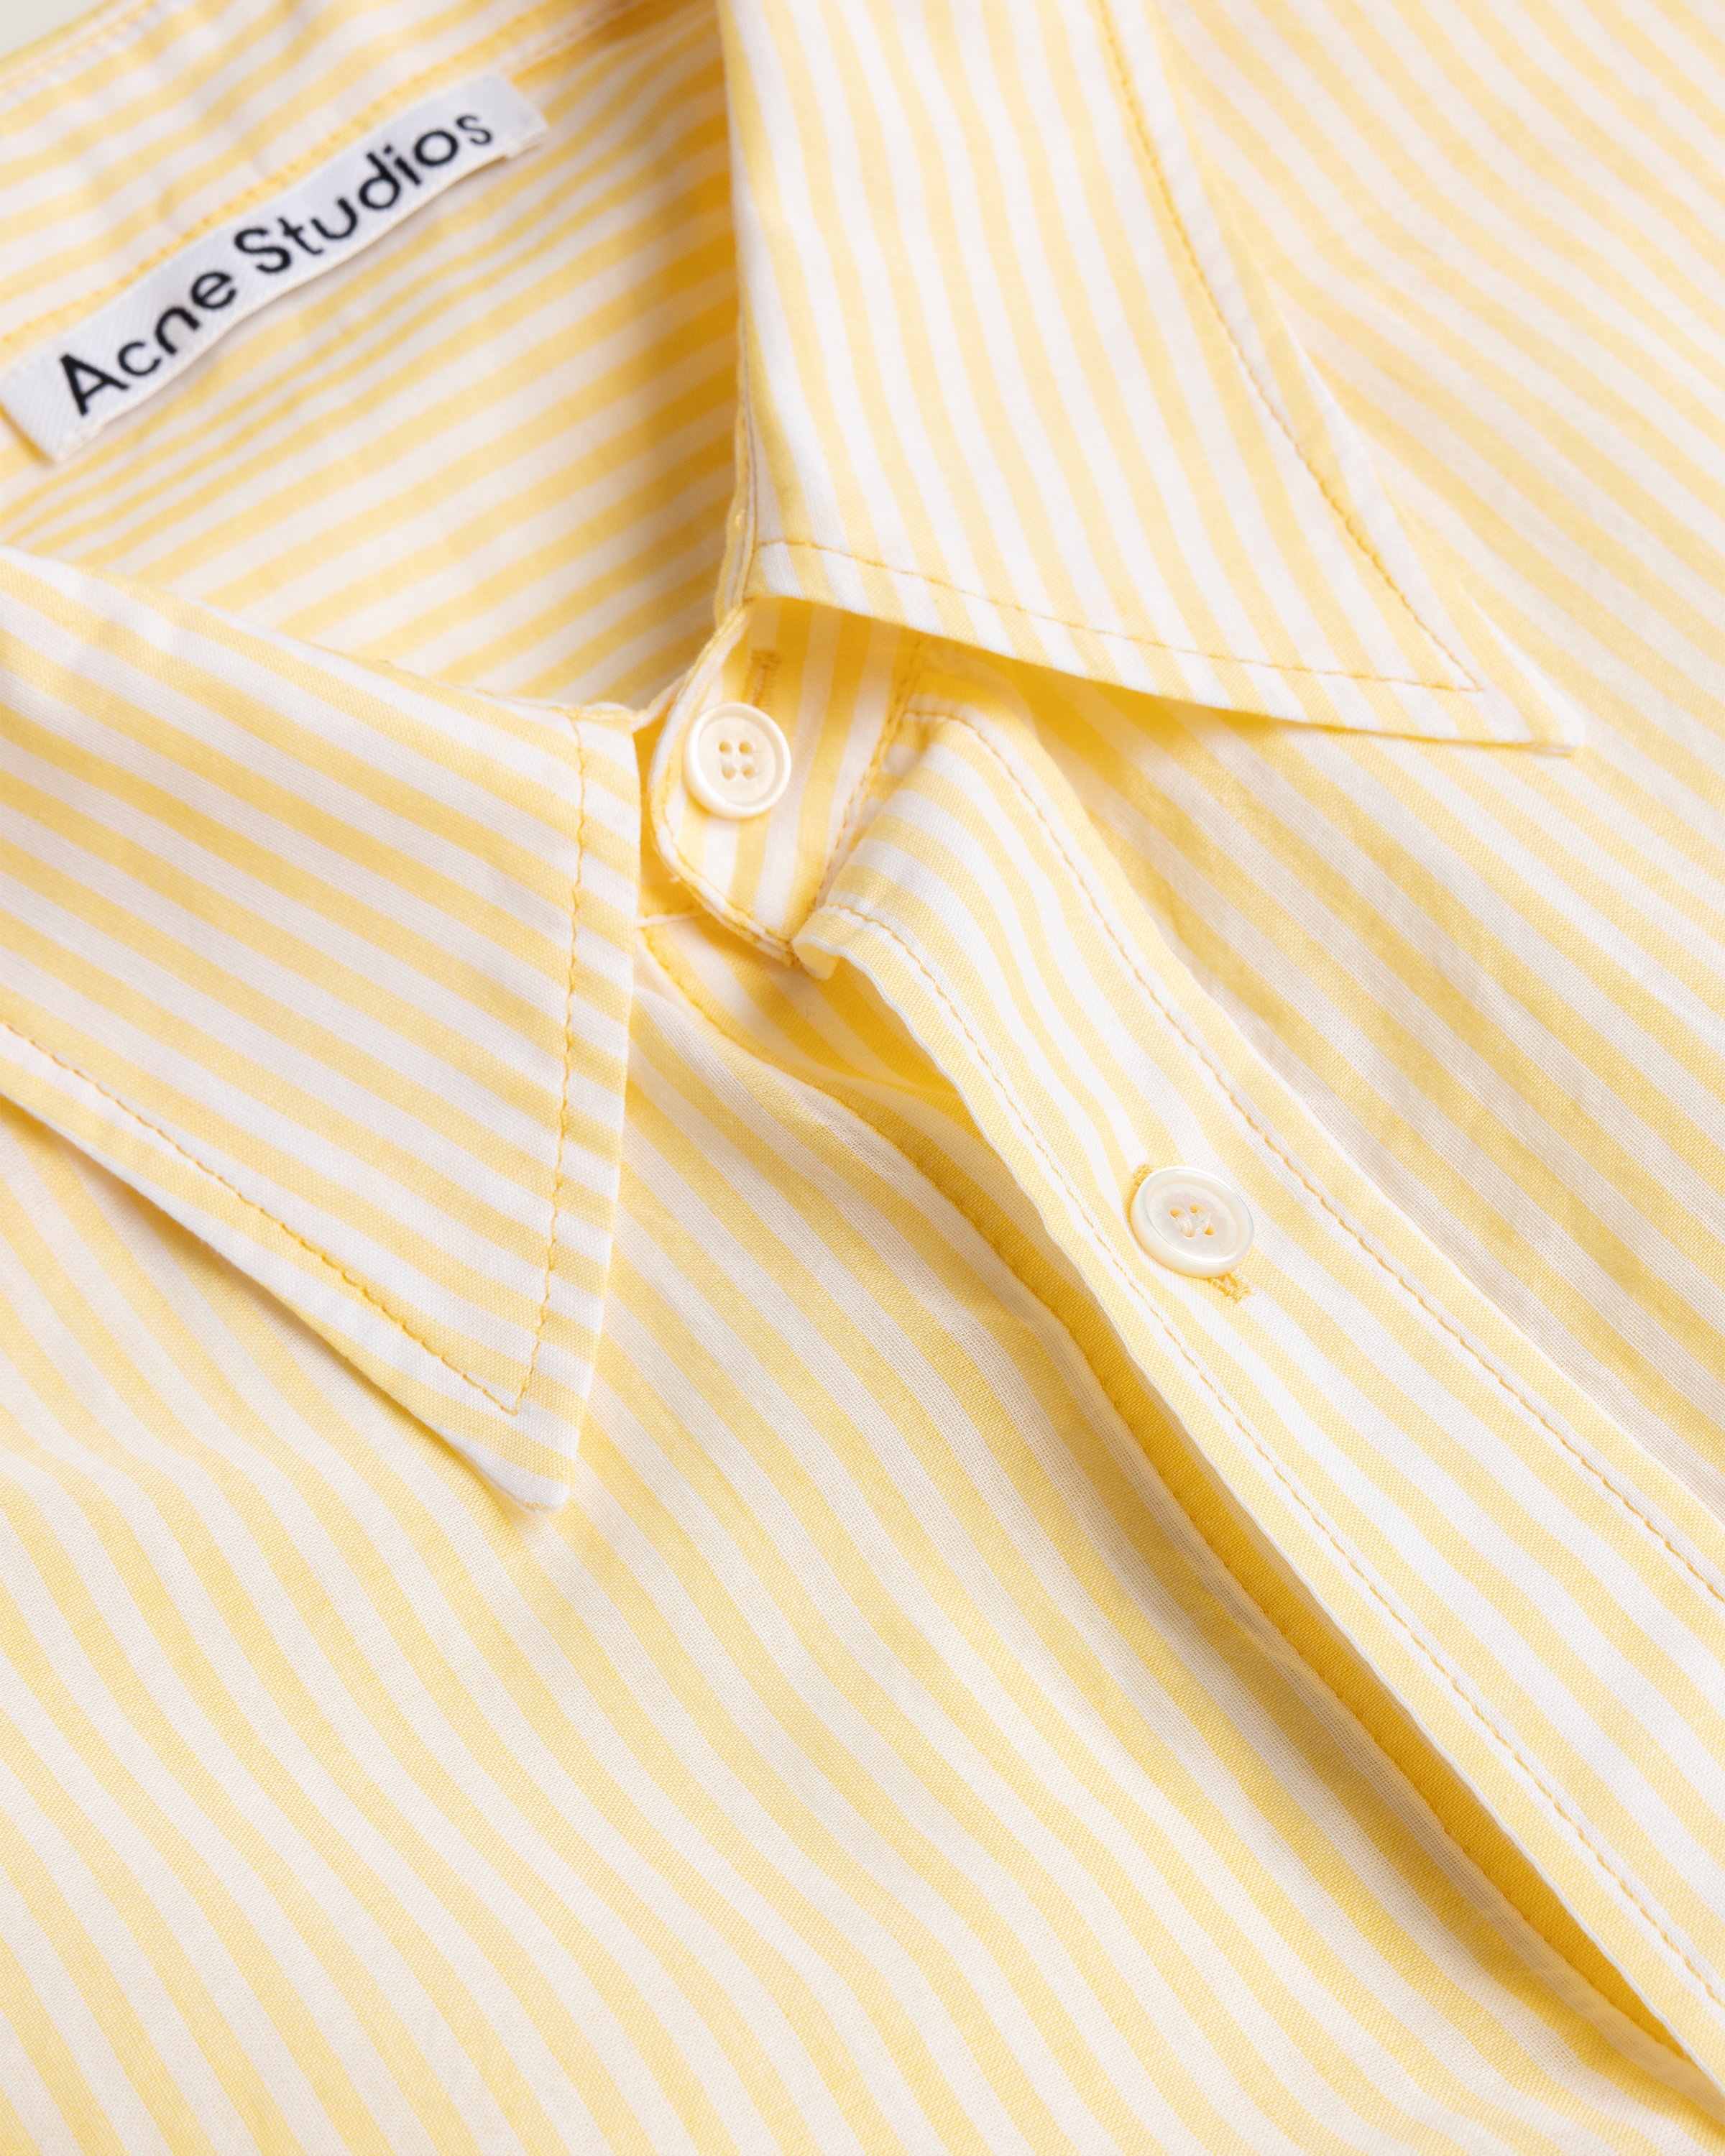 Acne Studios - Short Sleeve Button-Up Shirt Yellow - Clothing - Yellow - Image 5